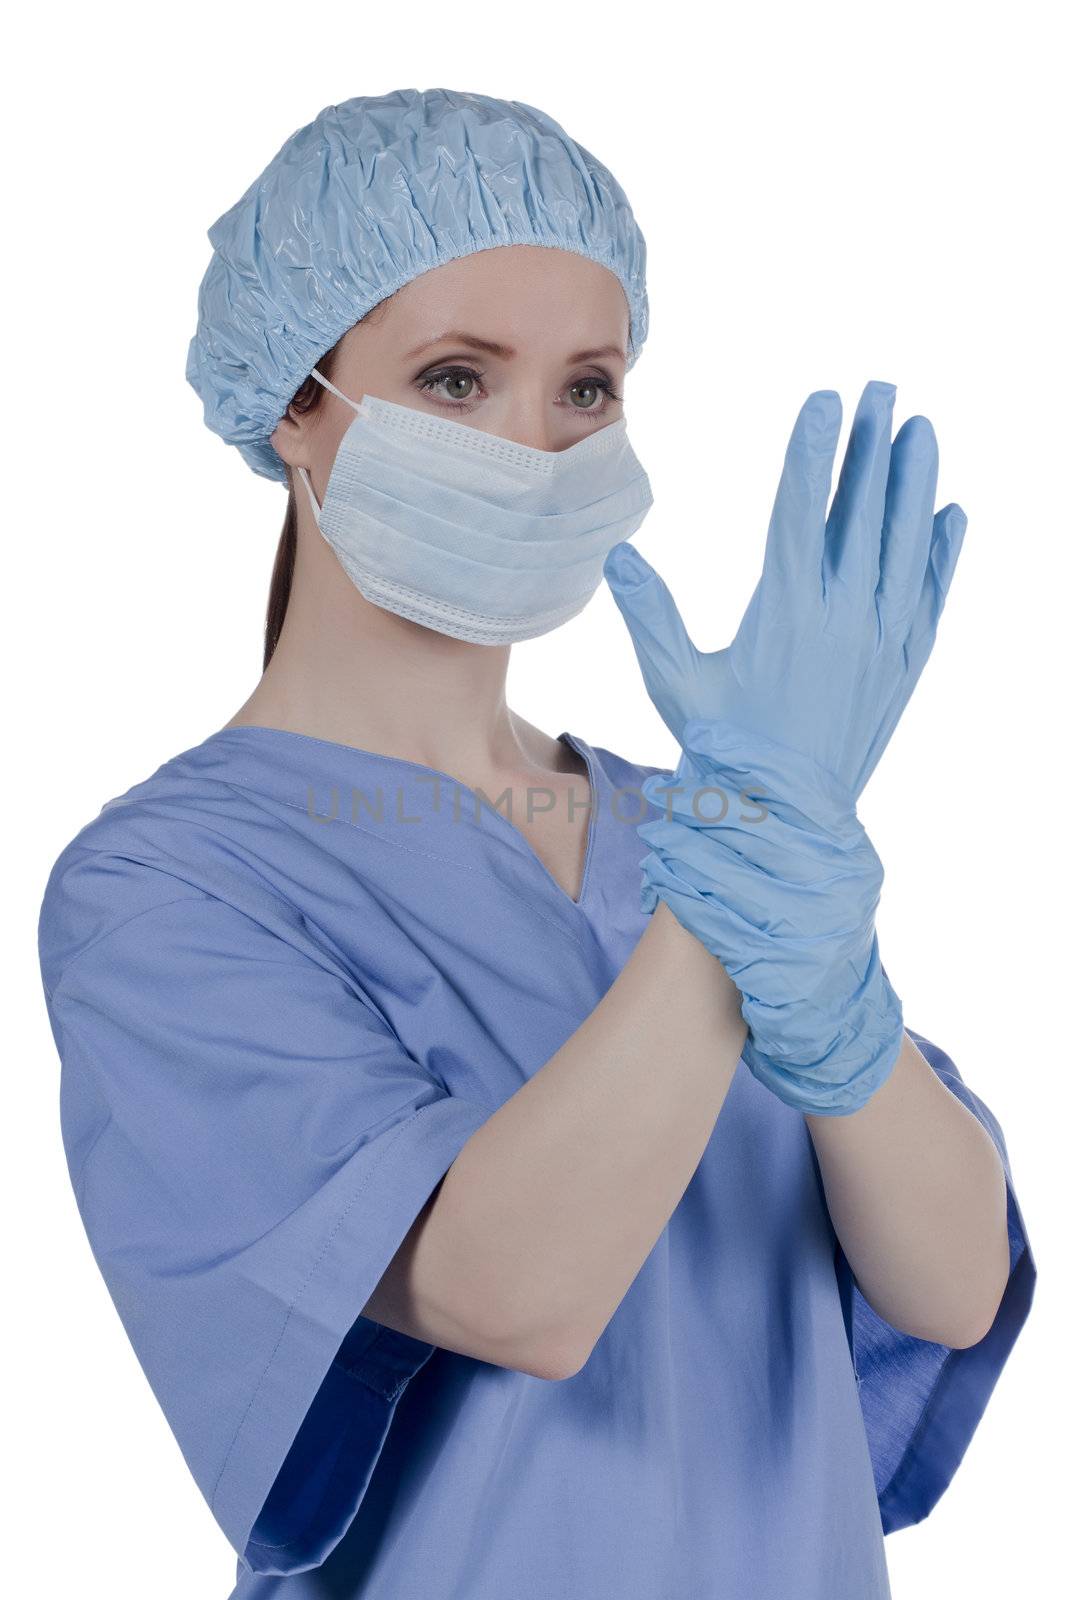 Close-up image of a female doctor wearing medical mask and gloves